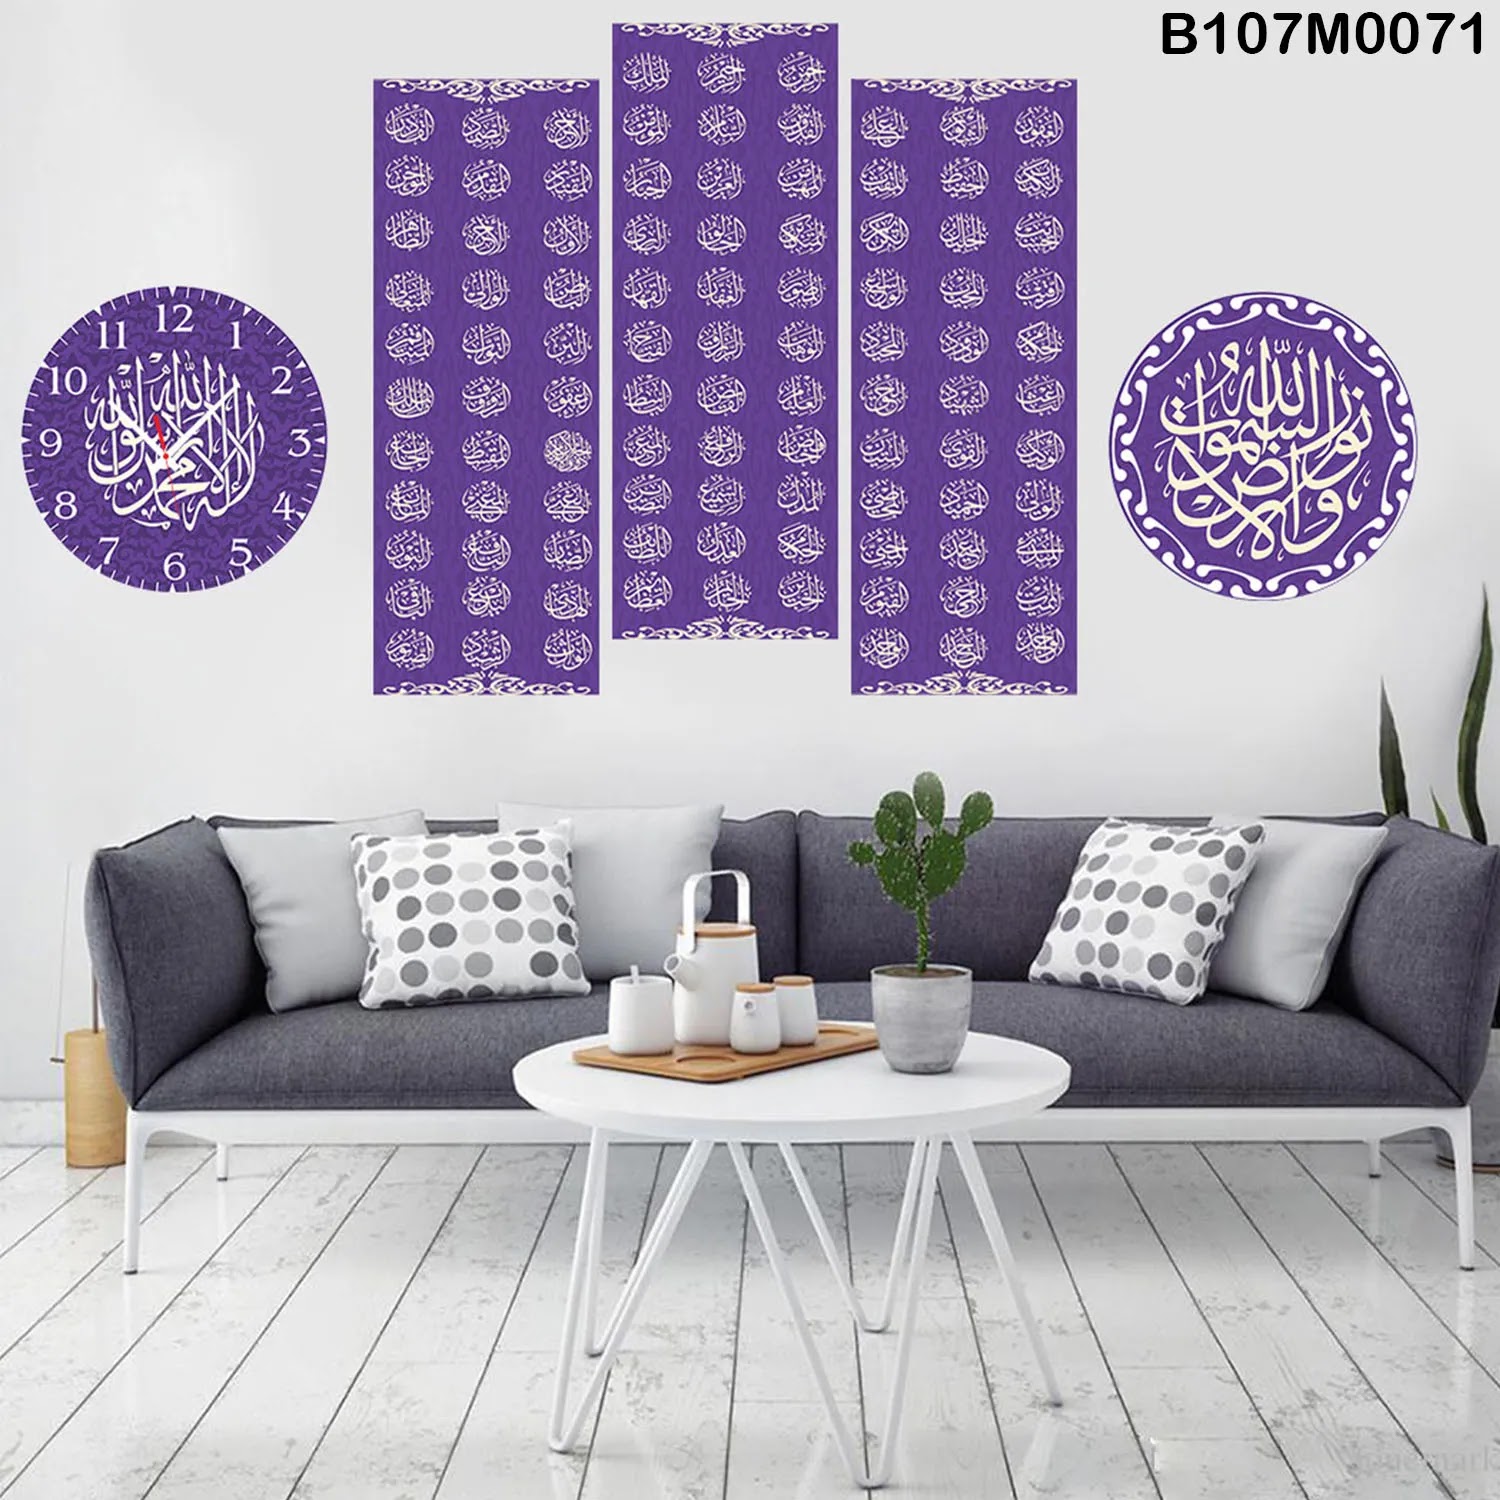 Purple Triptych, clock and a circle with GOD Names & Quran